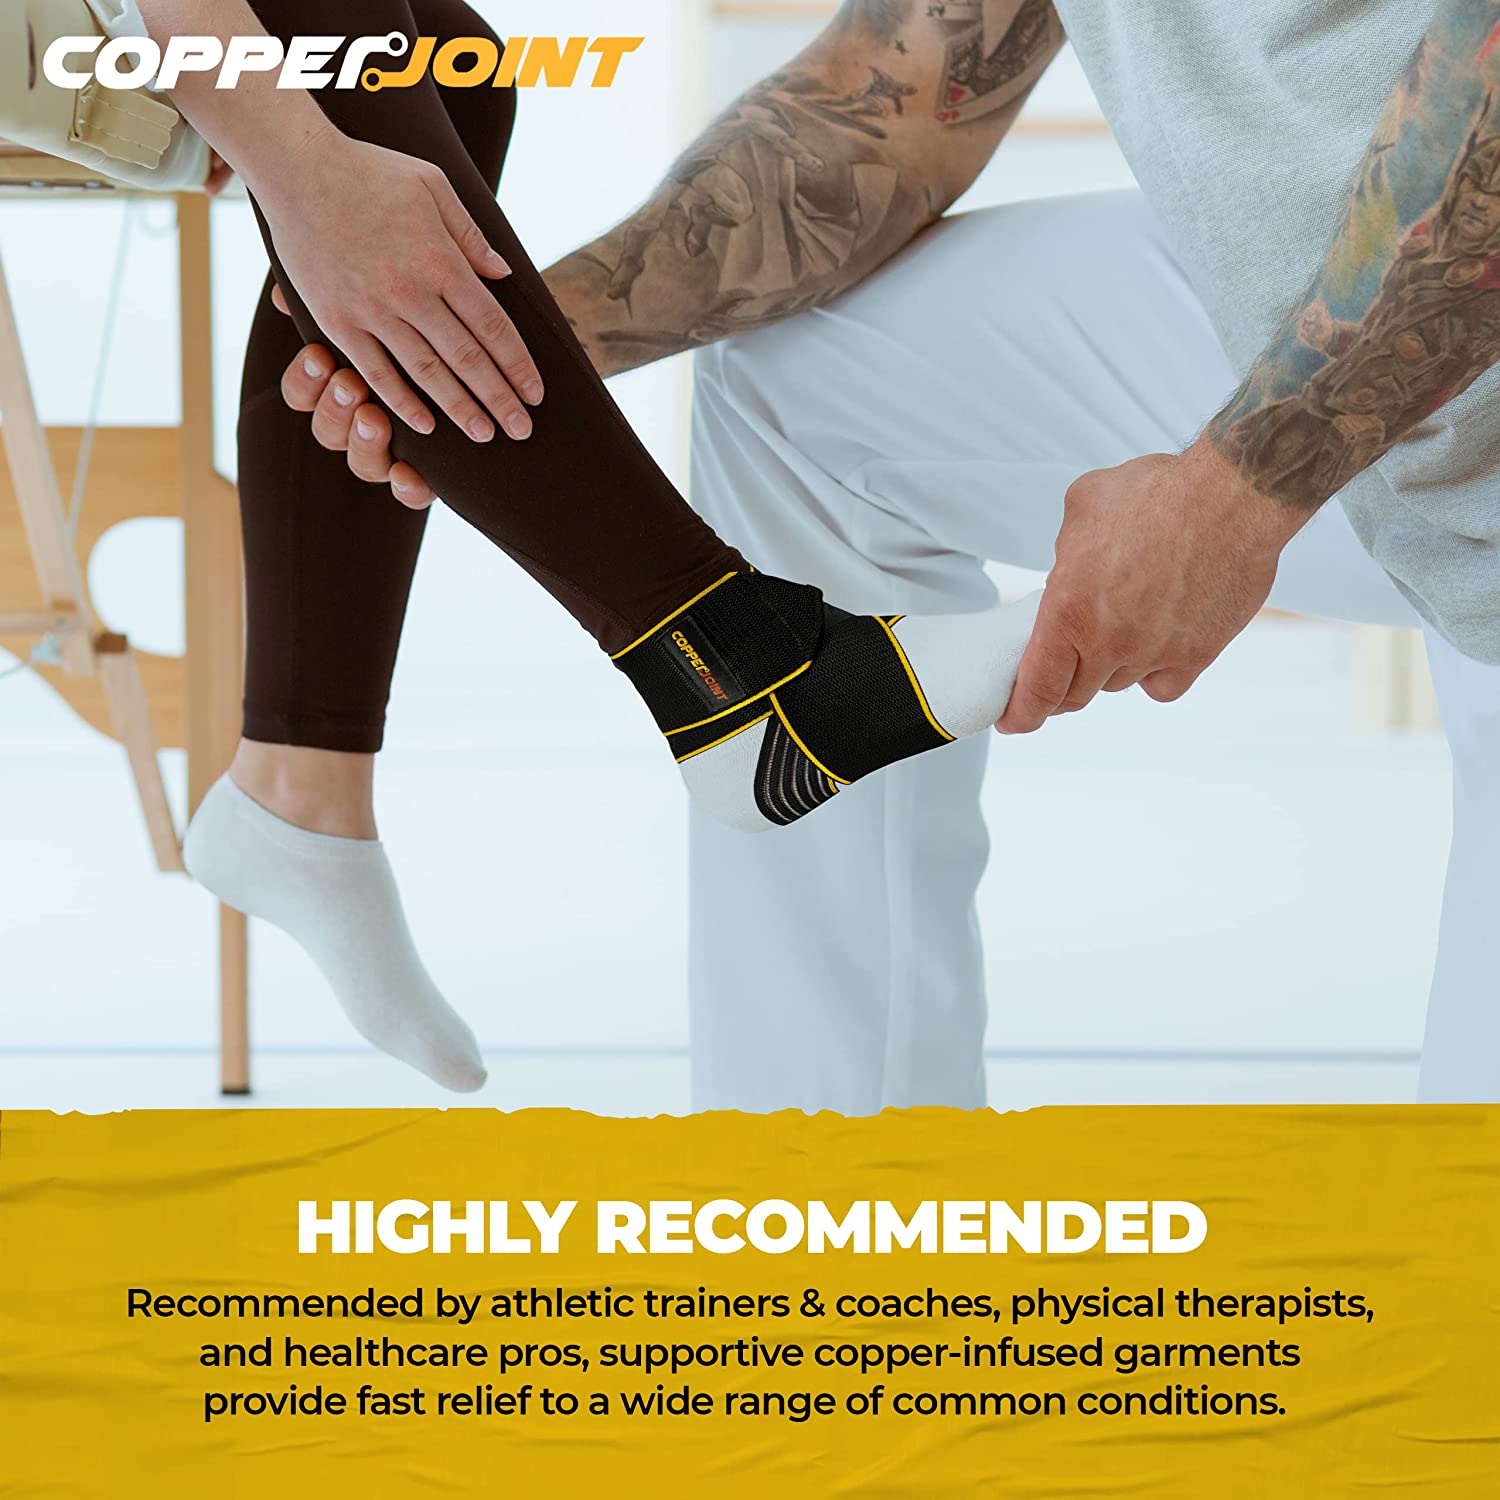 CopperJoint Launches New Ankle Support on Amazon